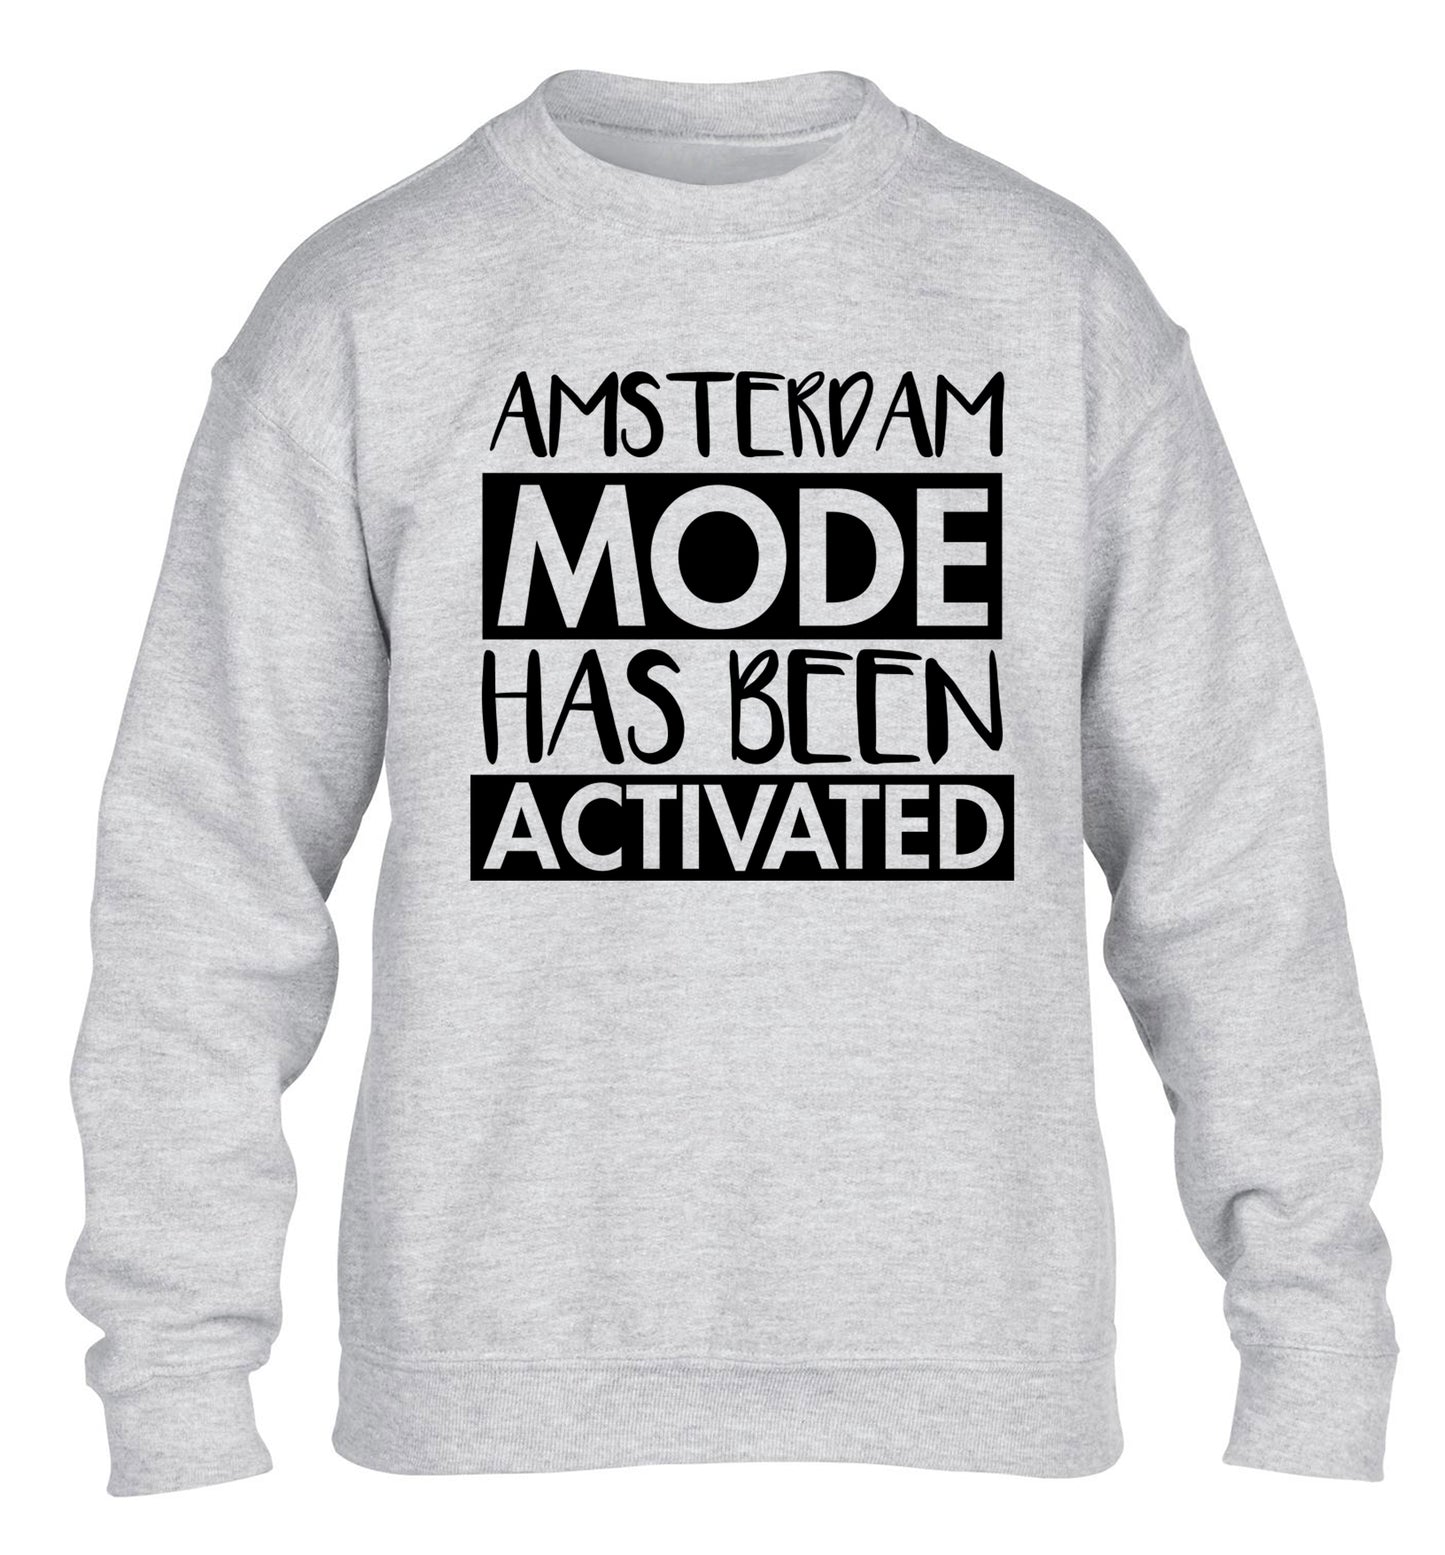 Amsterdam mode has been activated children's grey sweater 12-13 Years